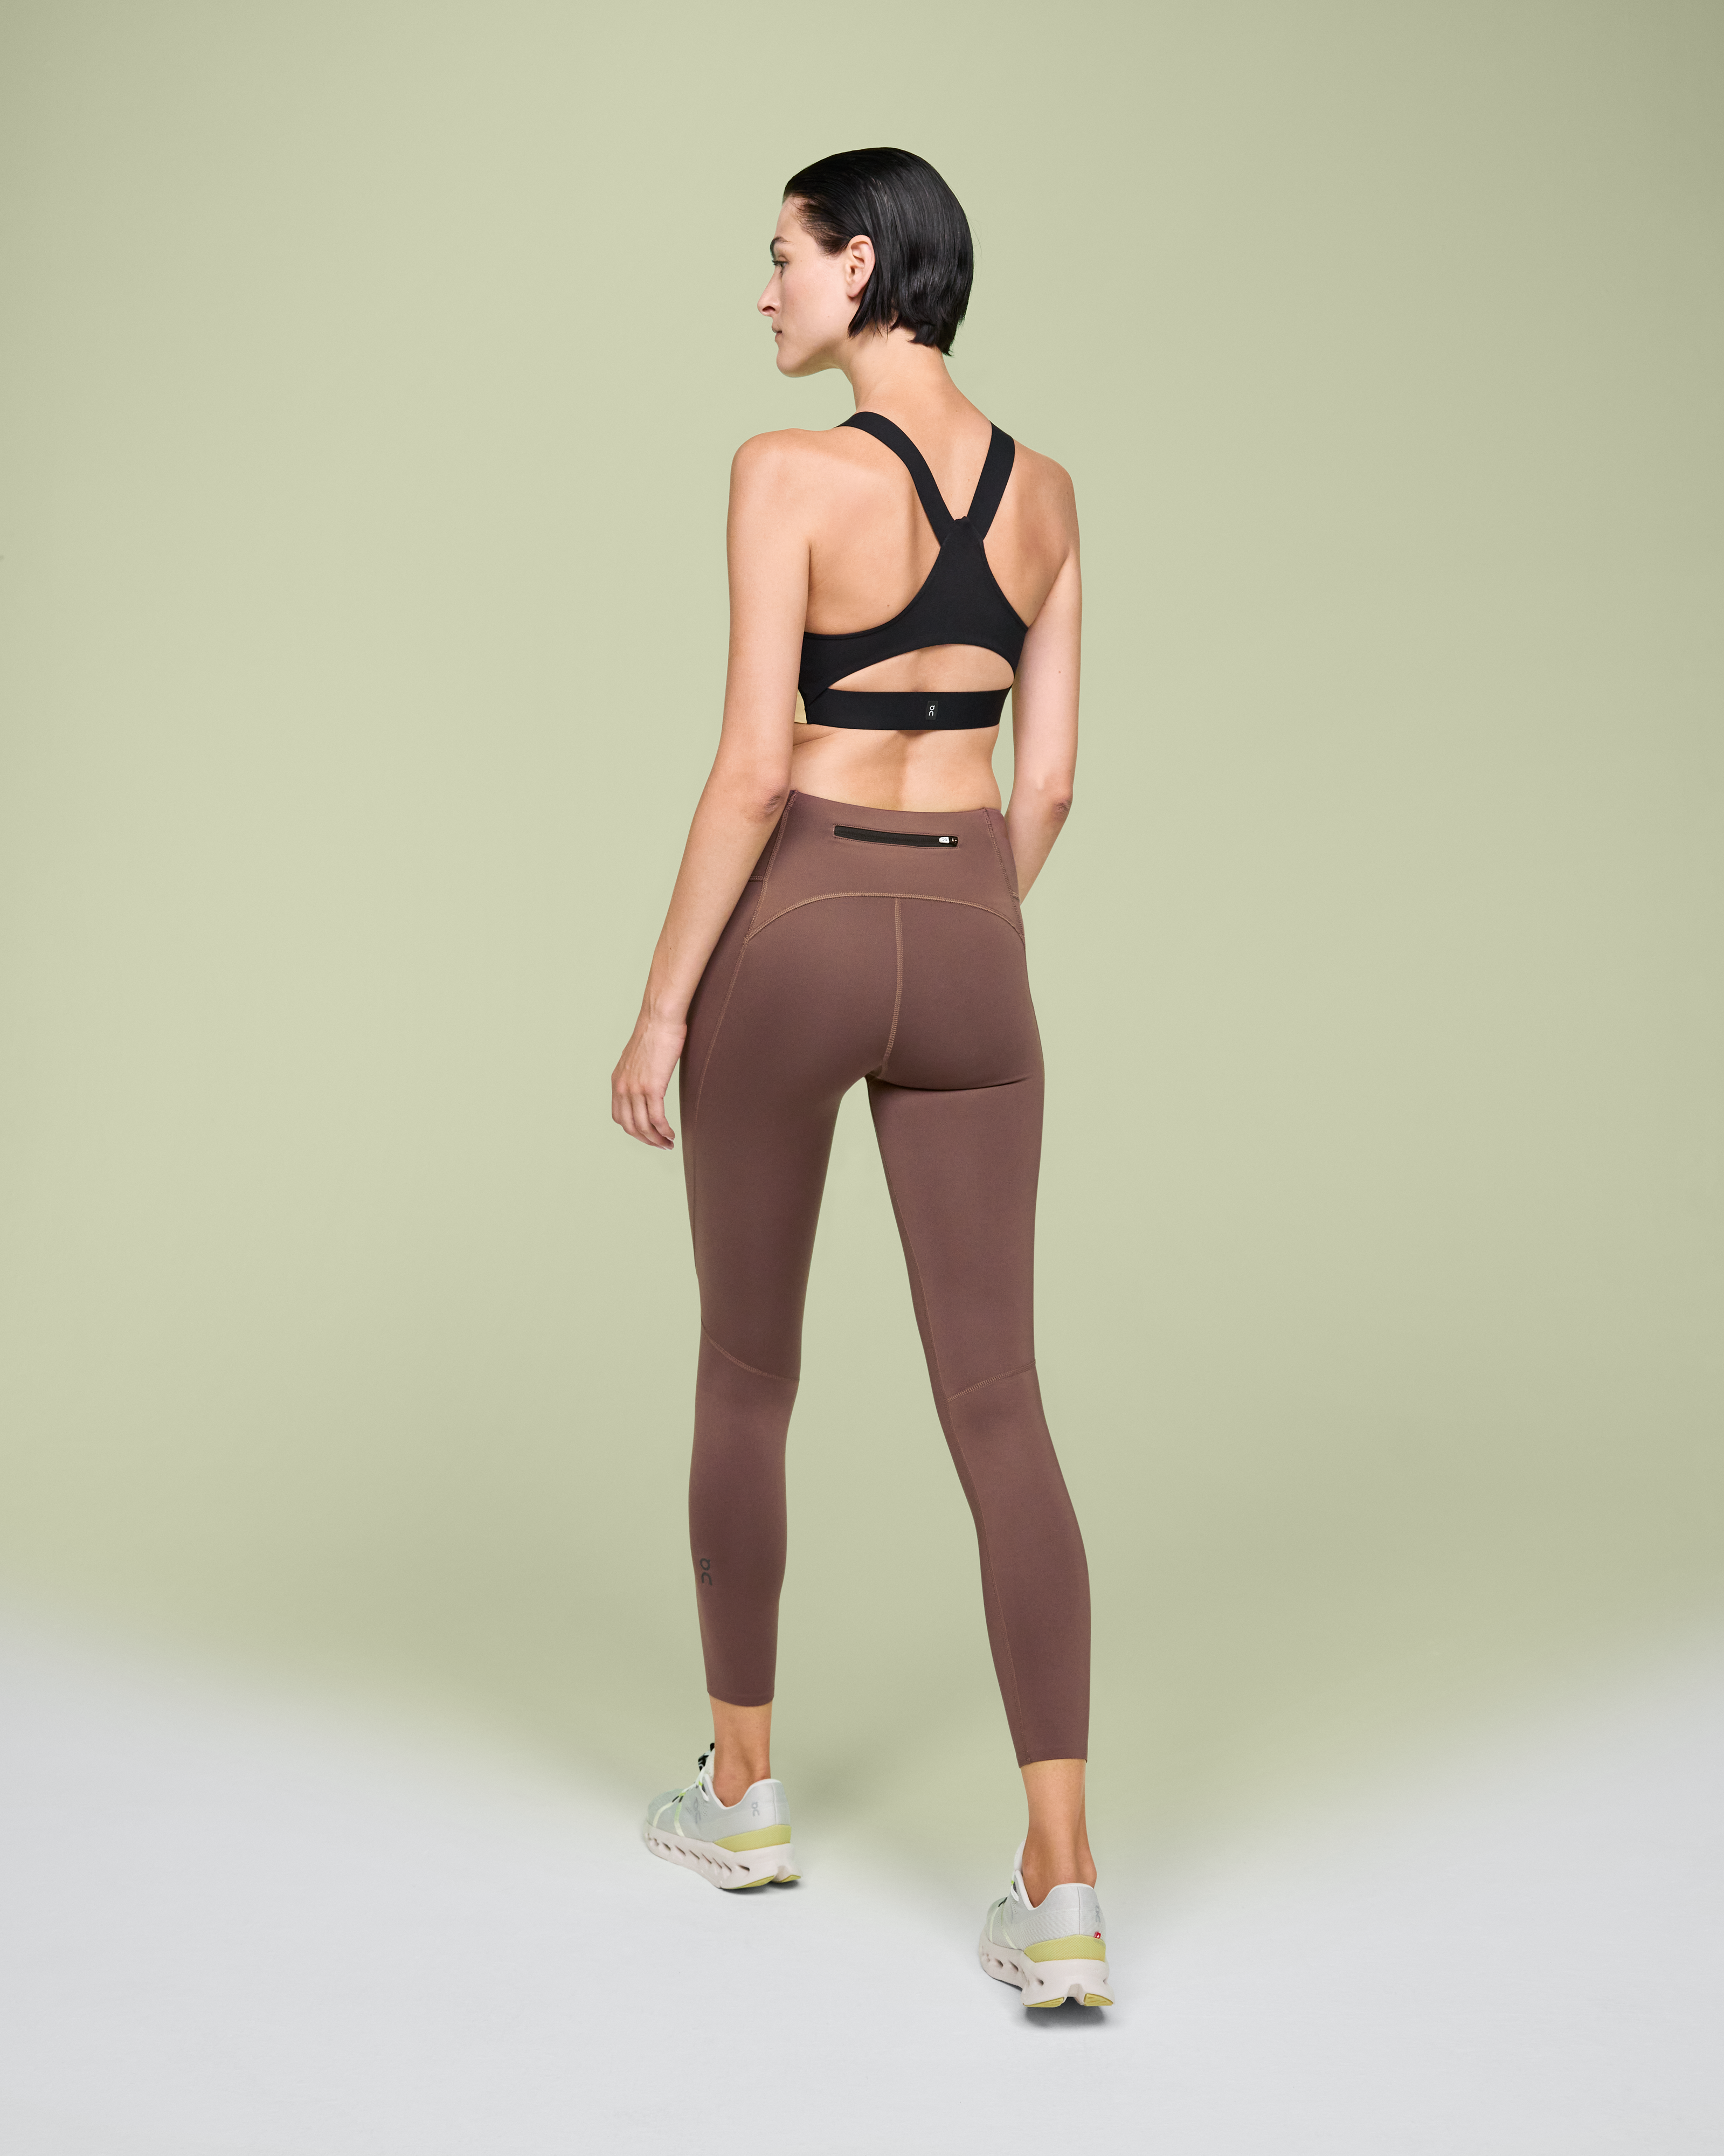 Performance Tights 7/8: Women's cropped running tights with phone